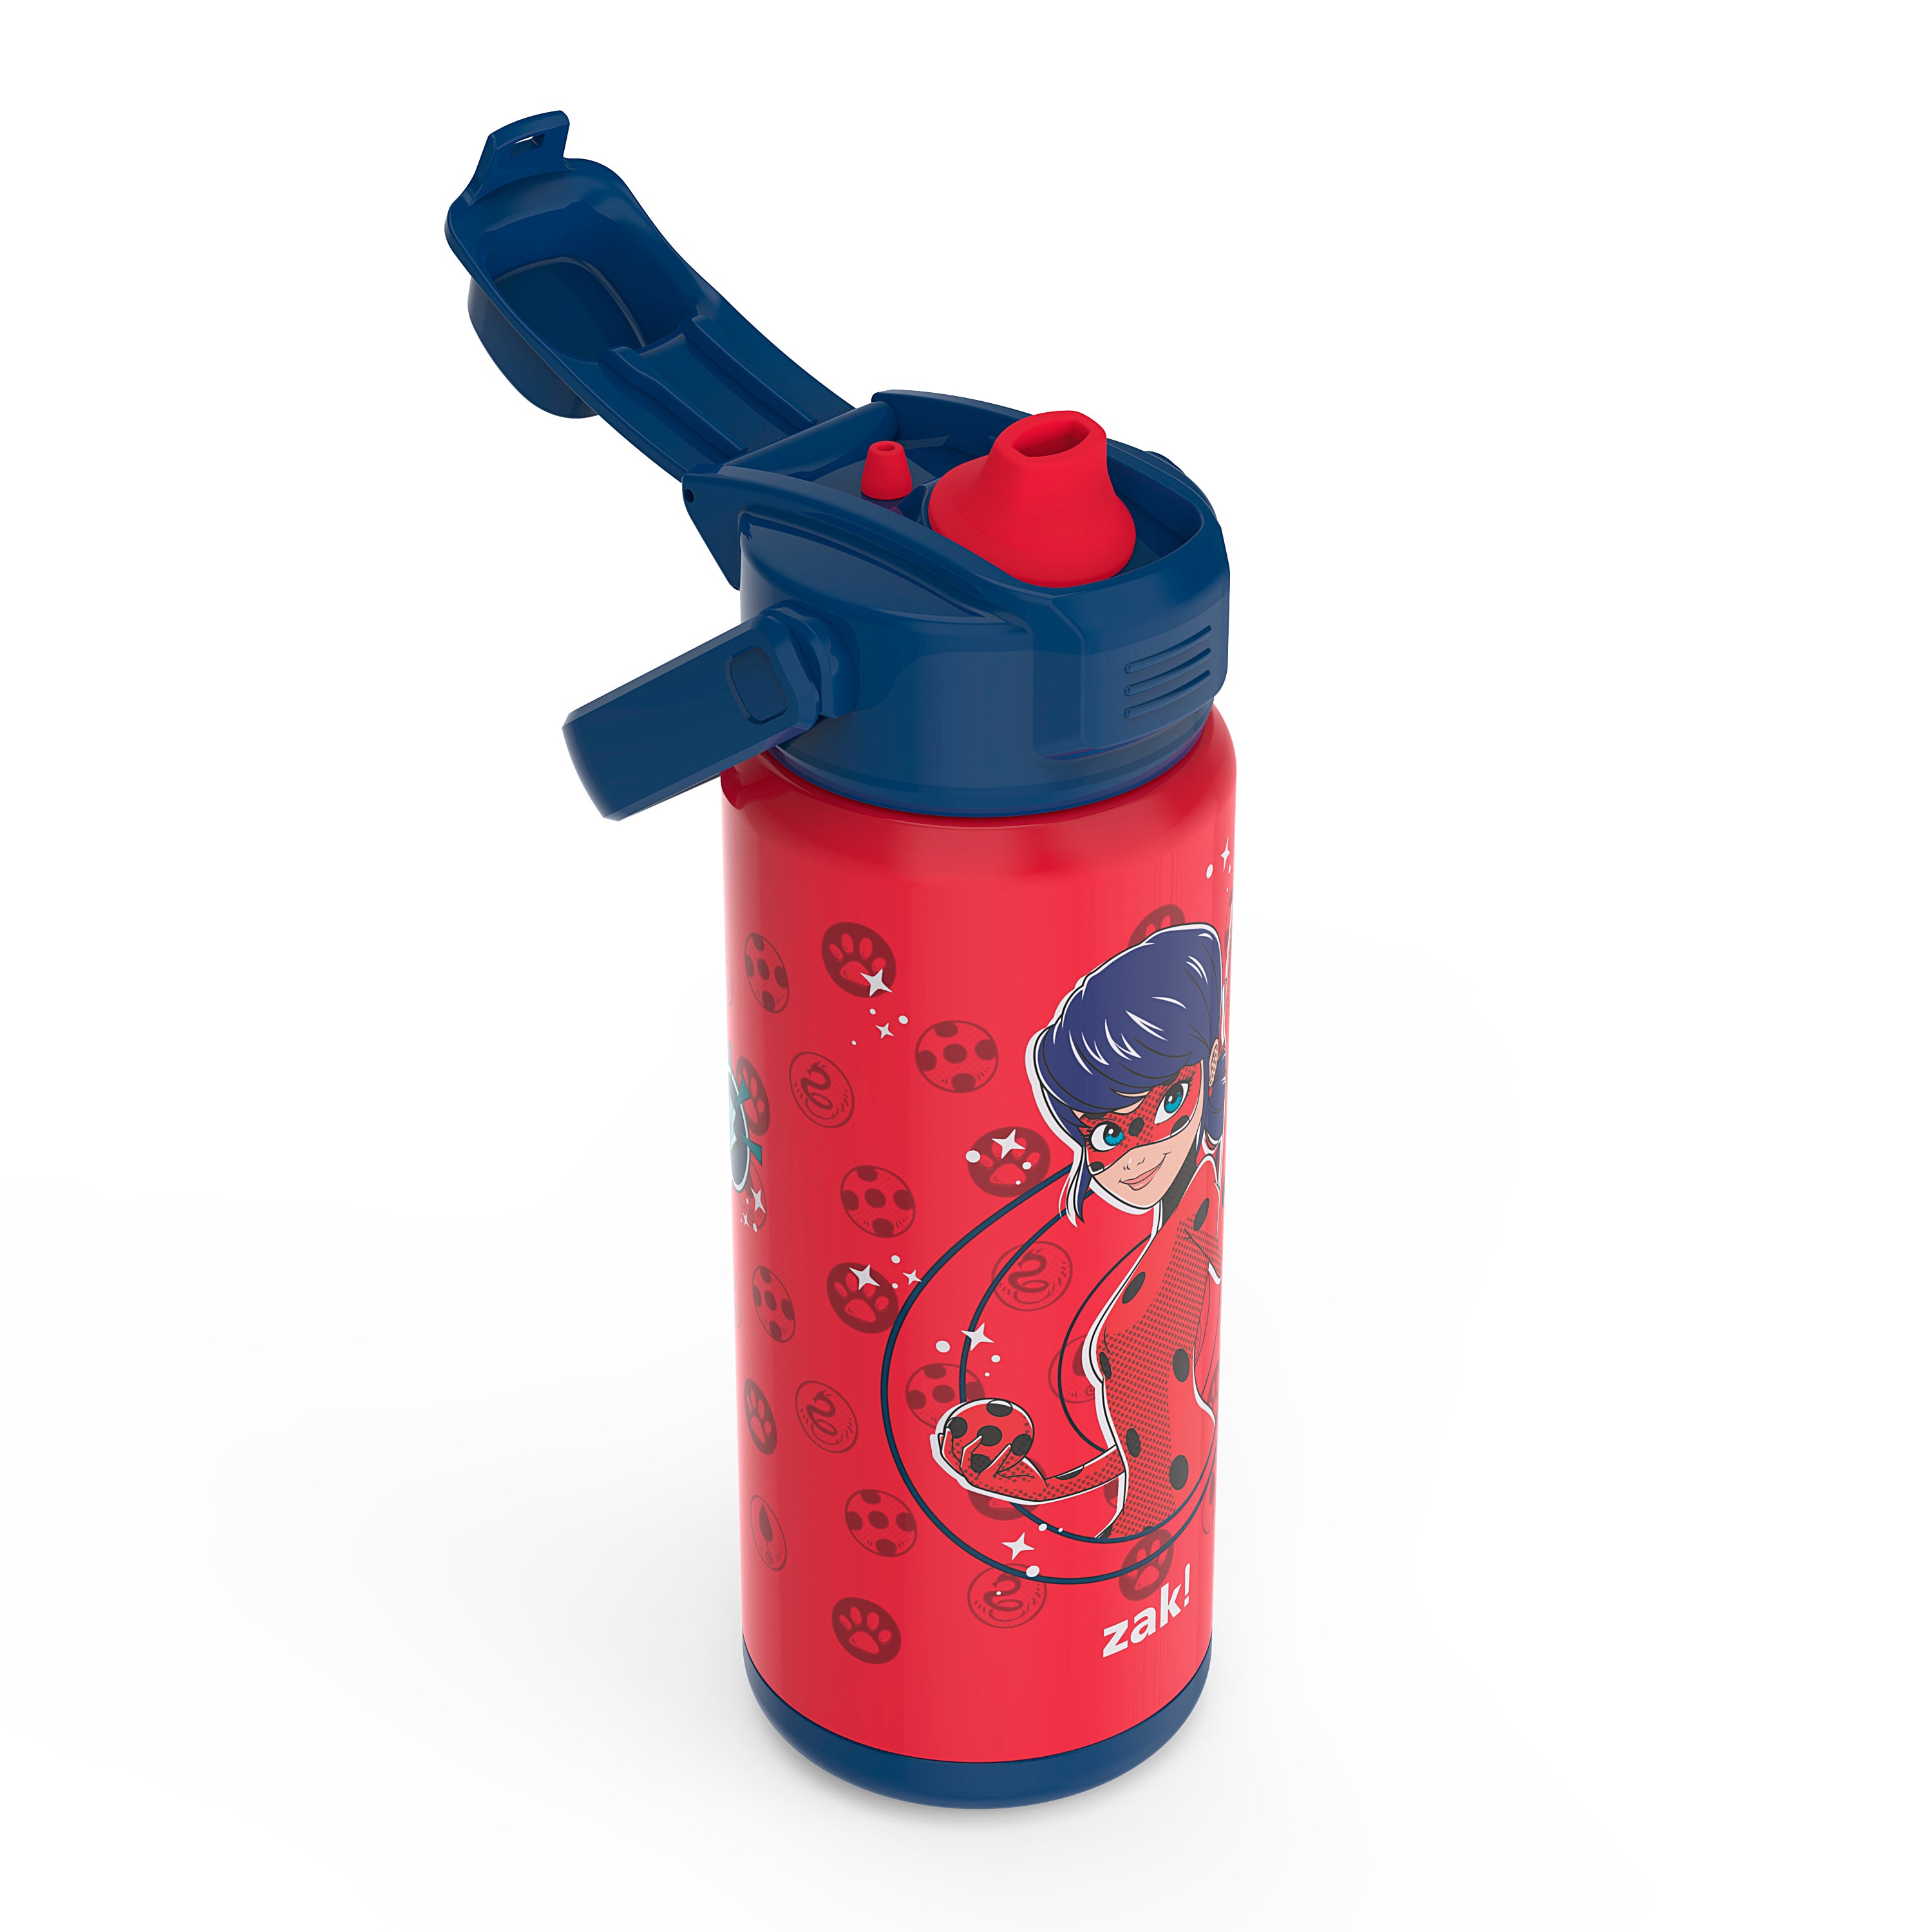 Miraculous Ladybug Beacon Stainless Steel Insulated Kids Water Bottle with Covered Spout, 20 Ounces